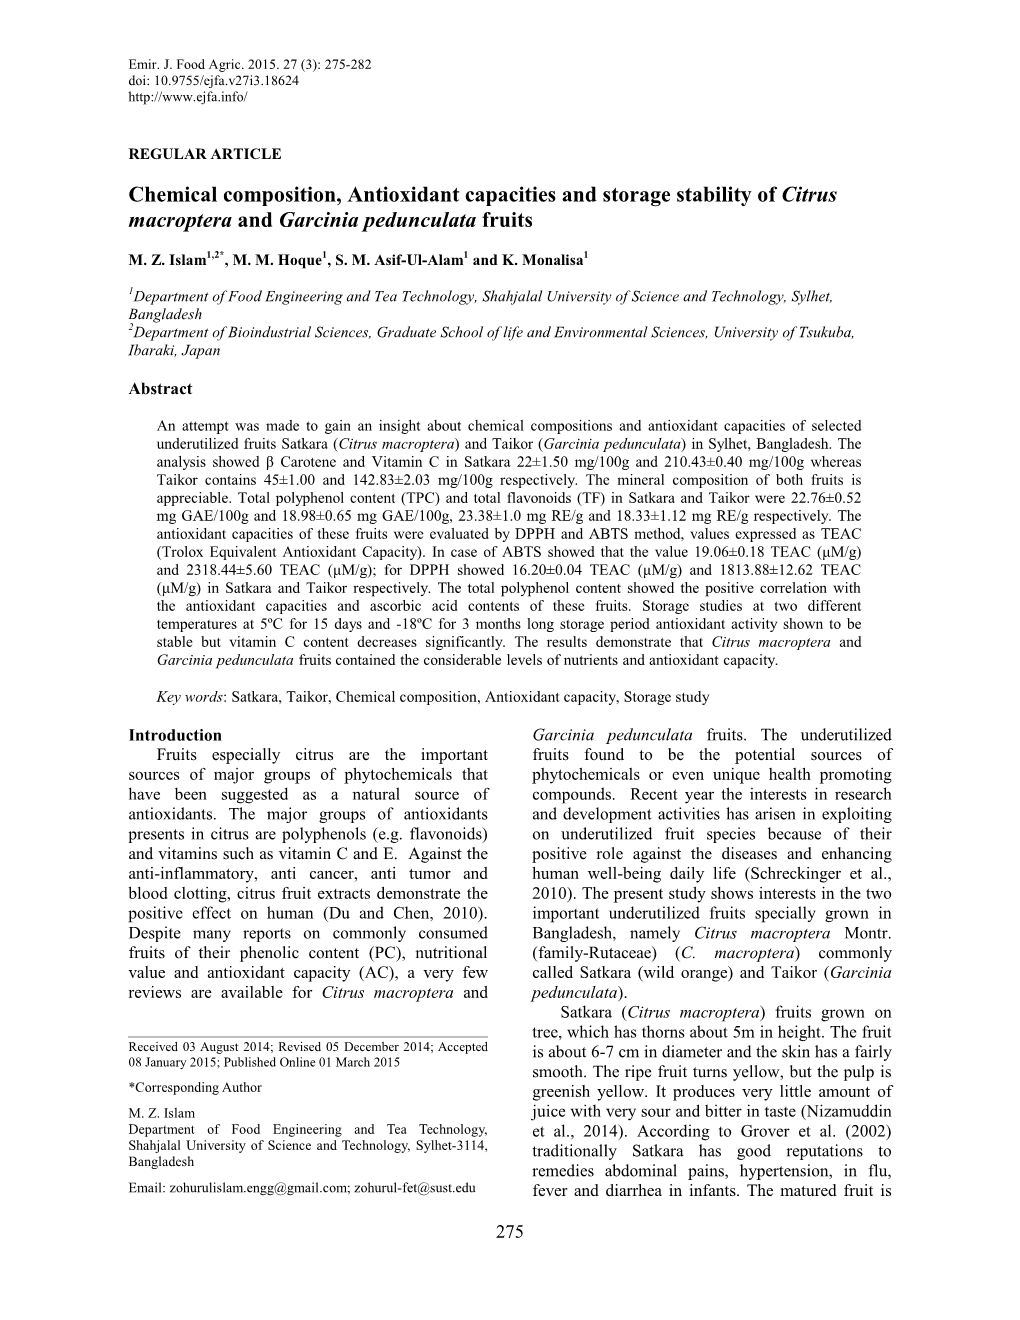 Chemical Composition, Antioxidant Capacities and Storage Stability of Citrus Macroptera and Garcinia Pedunculata Fruits